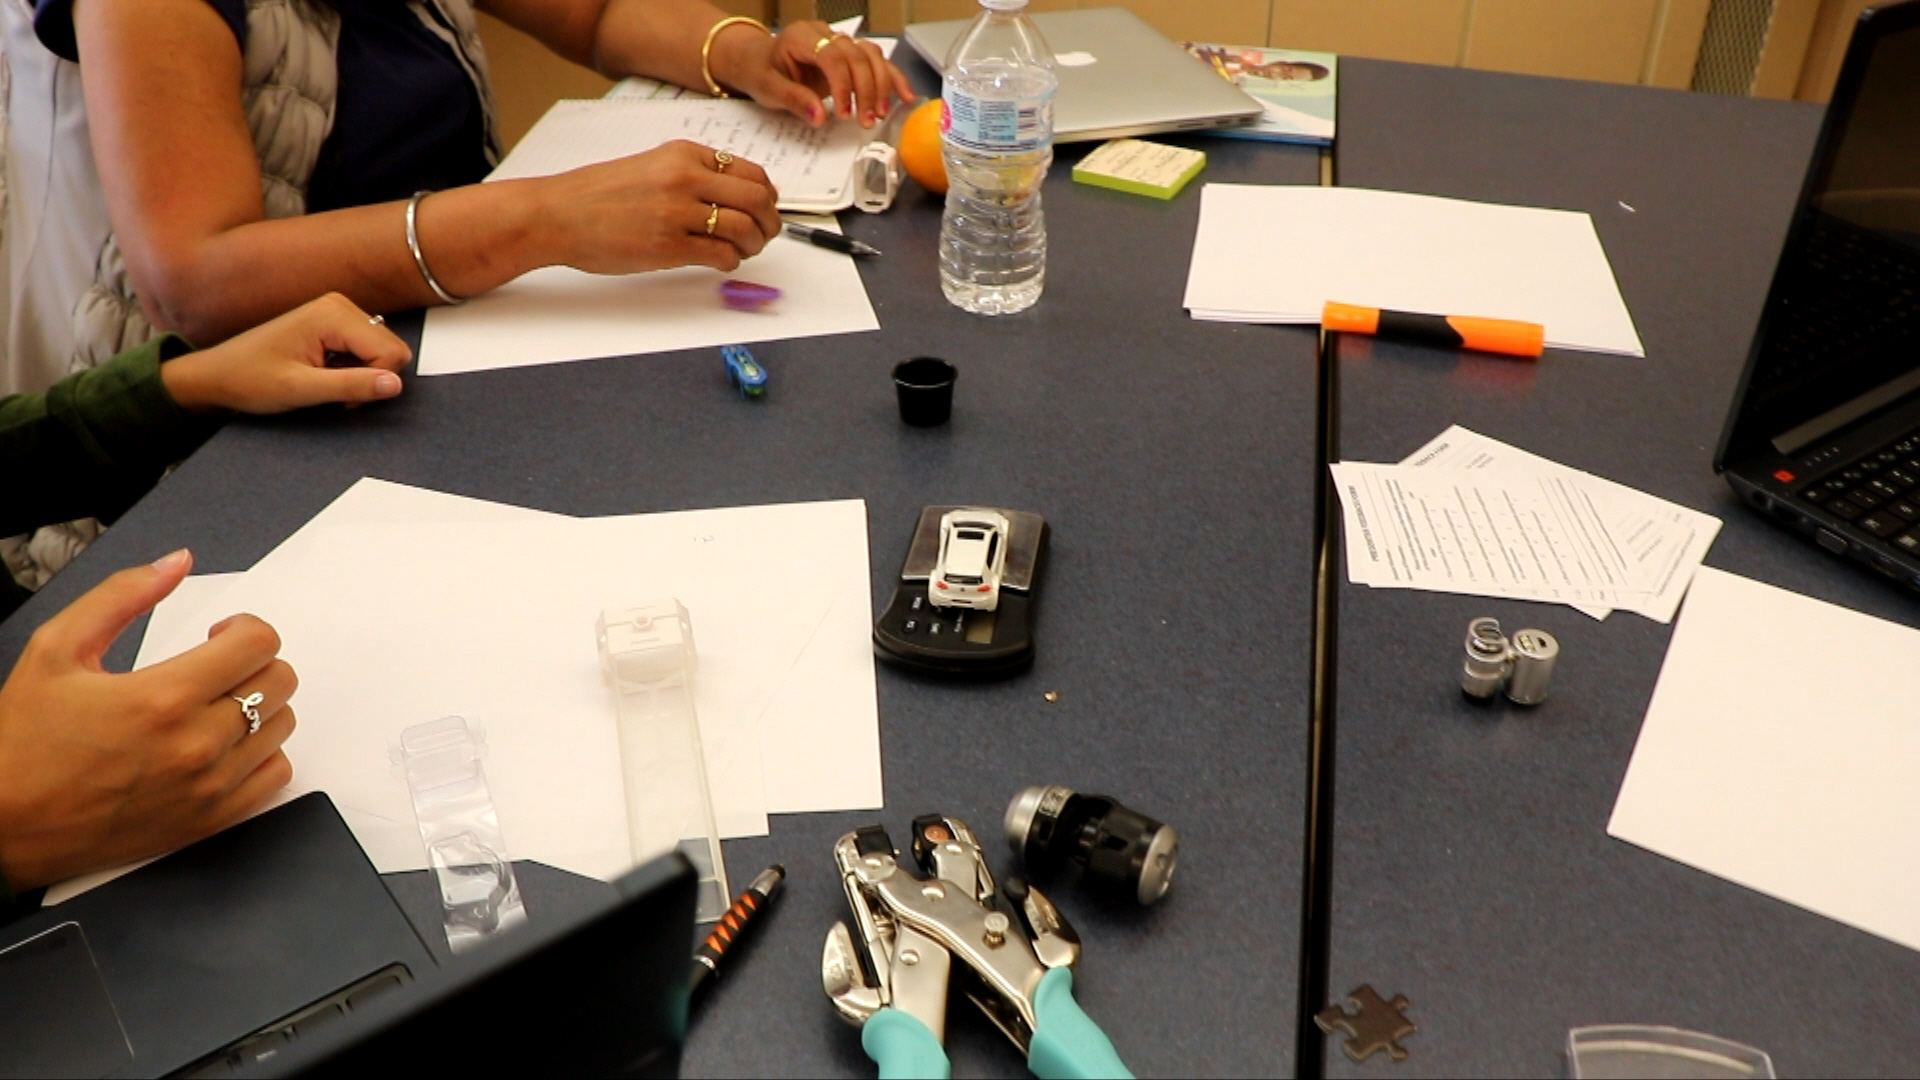 STEM and MakerEd teacher training by Dr. Diana Wehrell-Grabowski